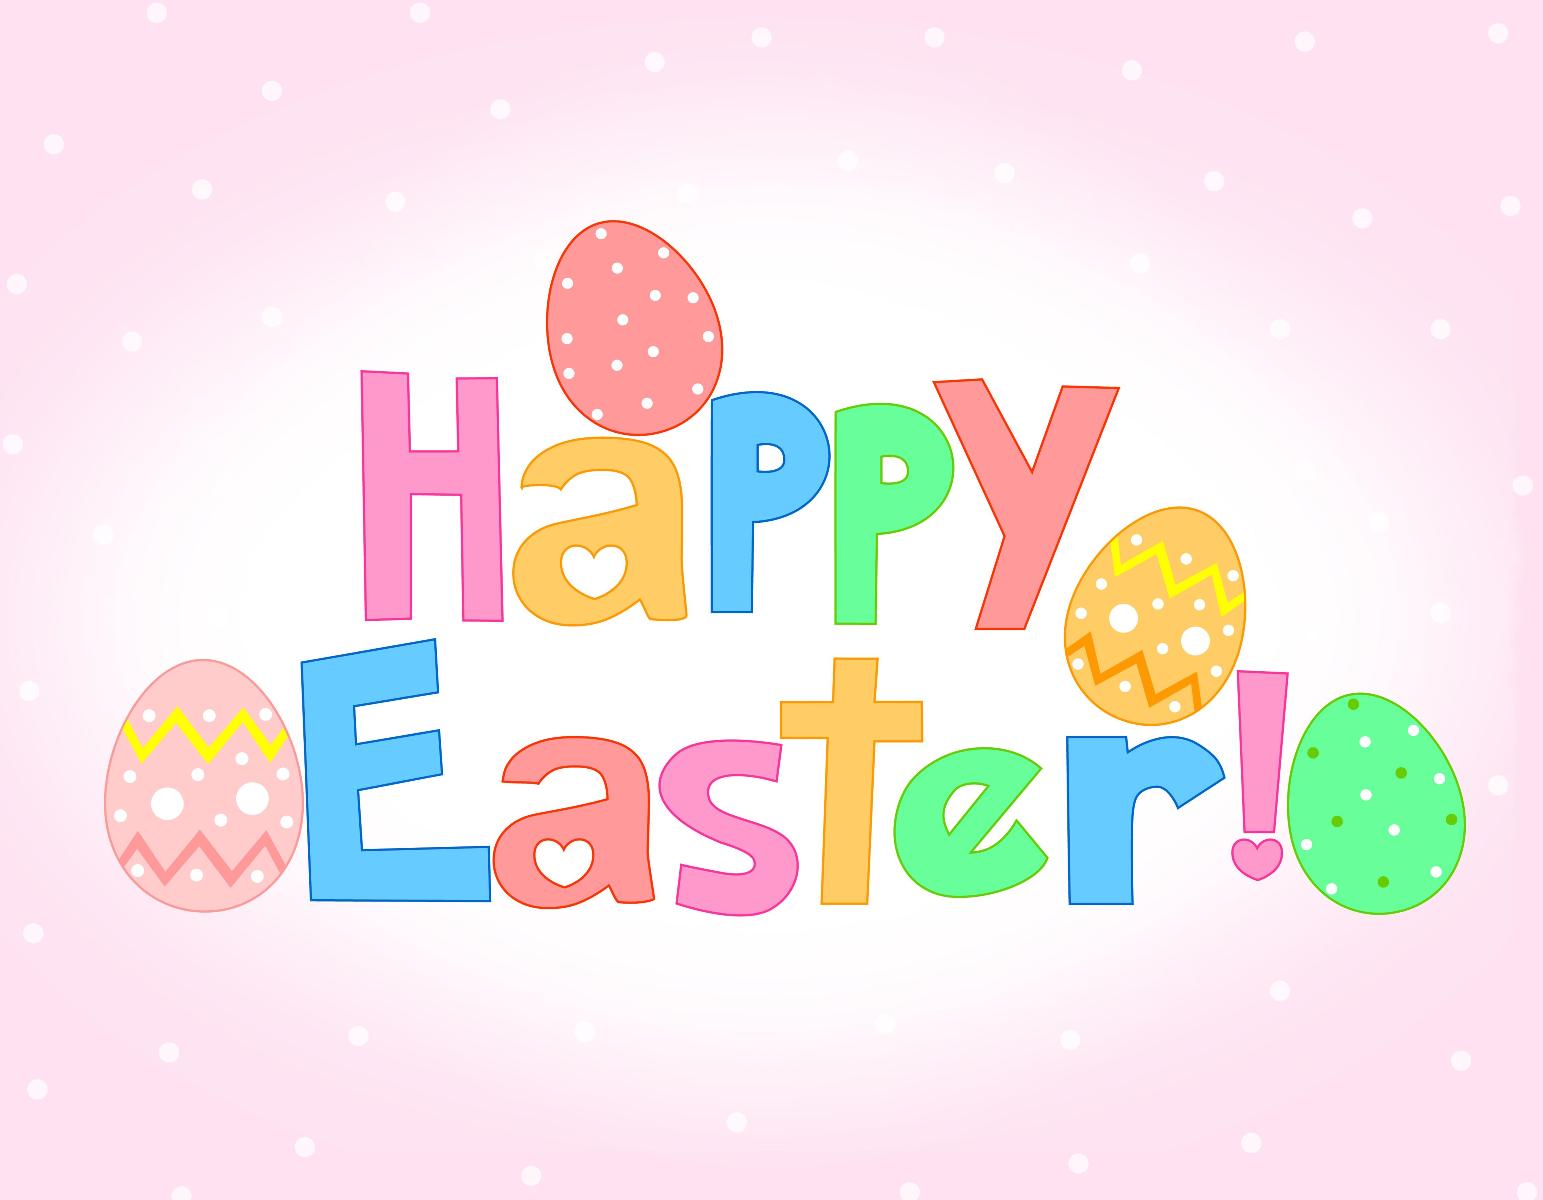 Happy easter quotes for friends boyfriend girlfriend family jpg